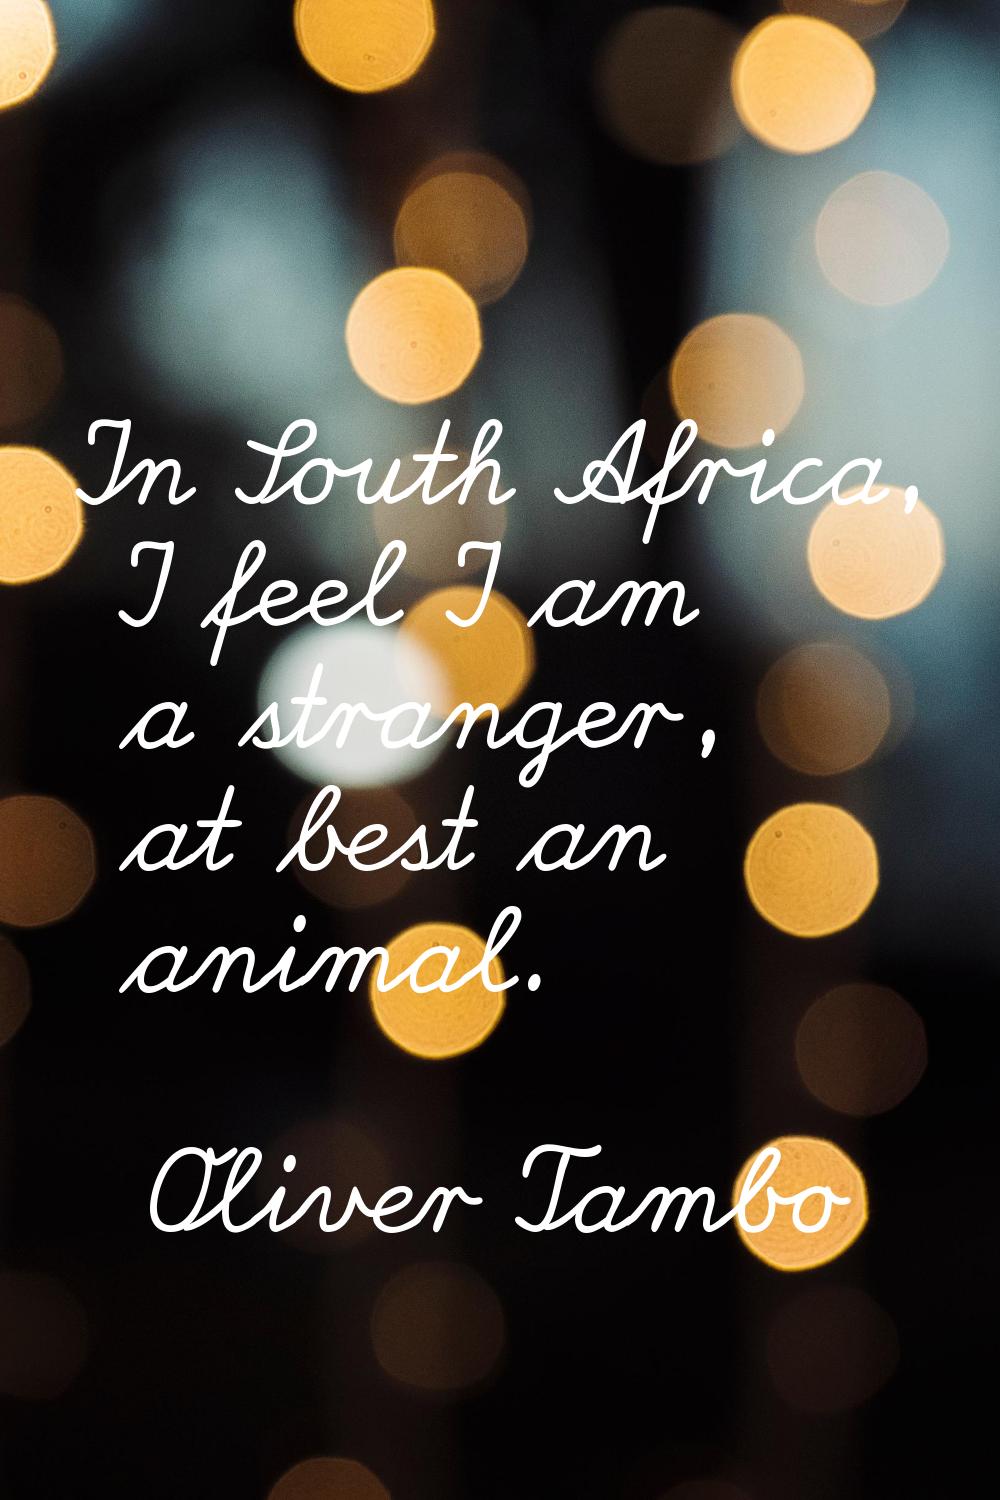 In South Africa, I feel I am a stranger, at best an animal.